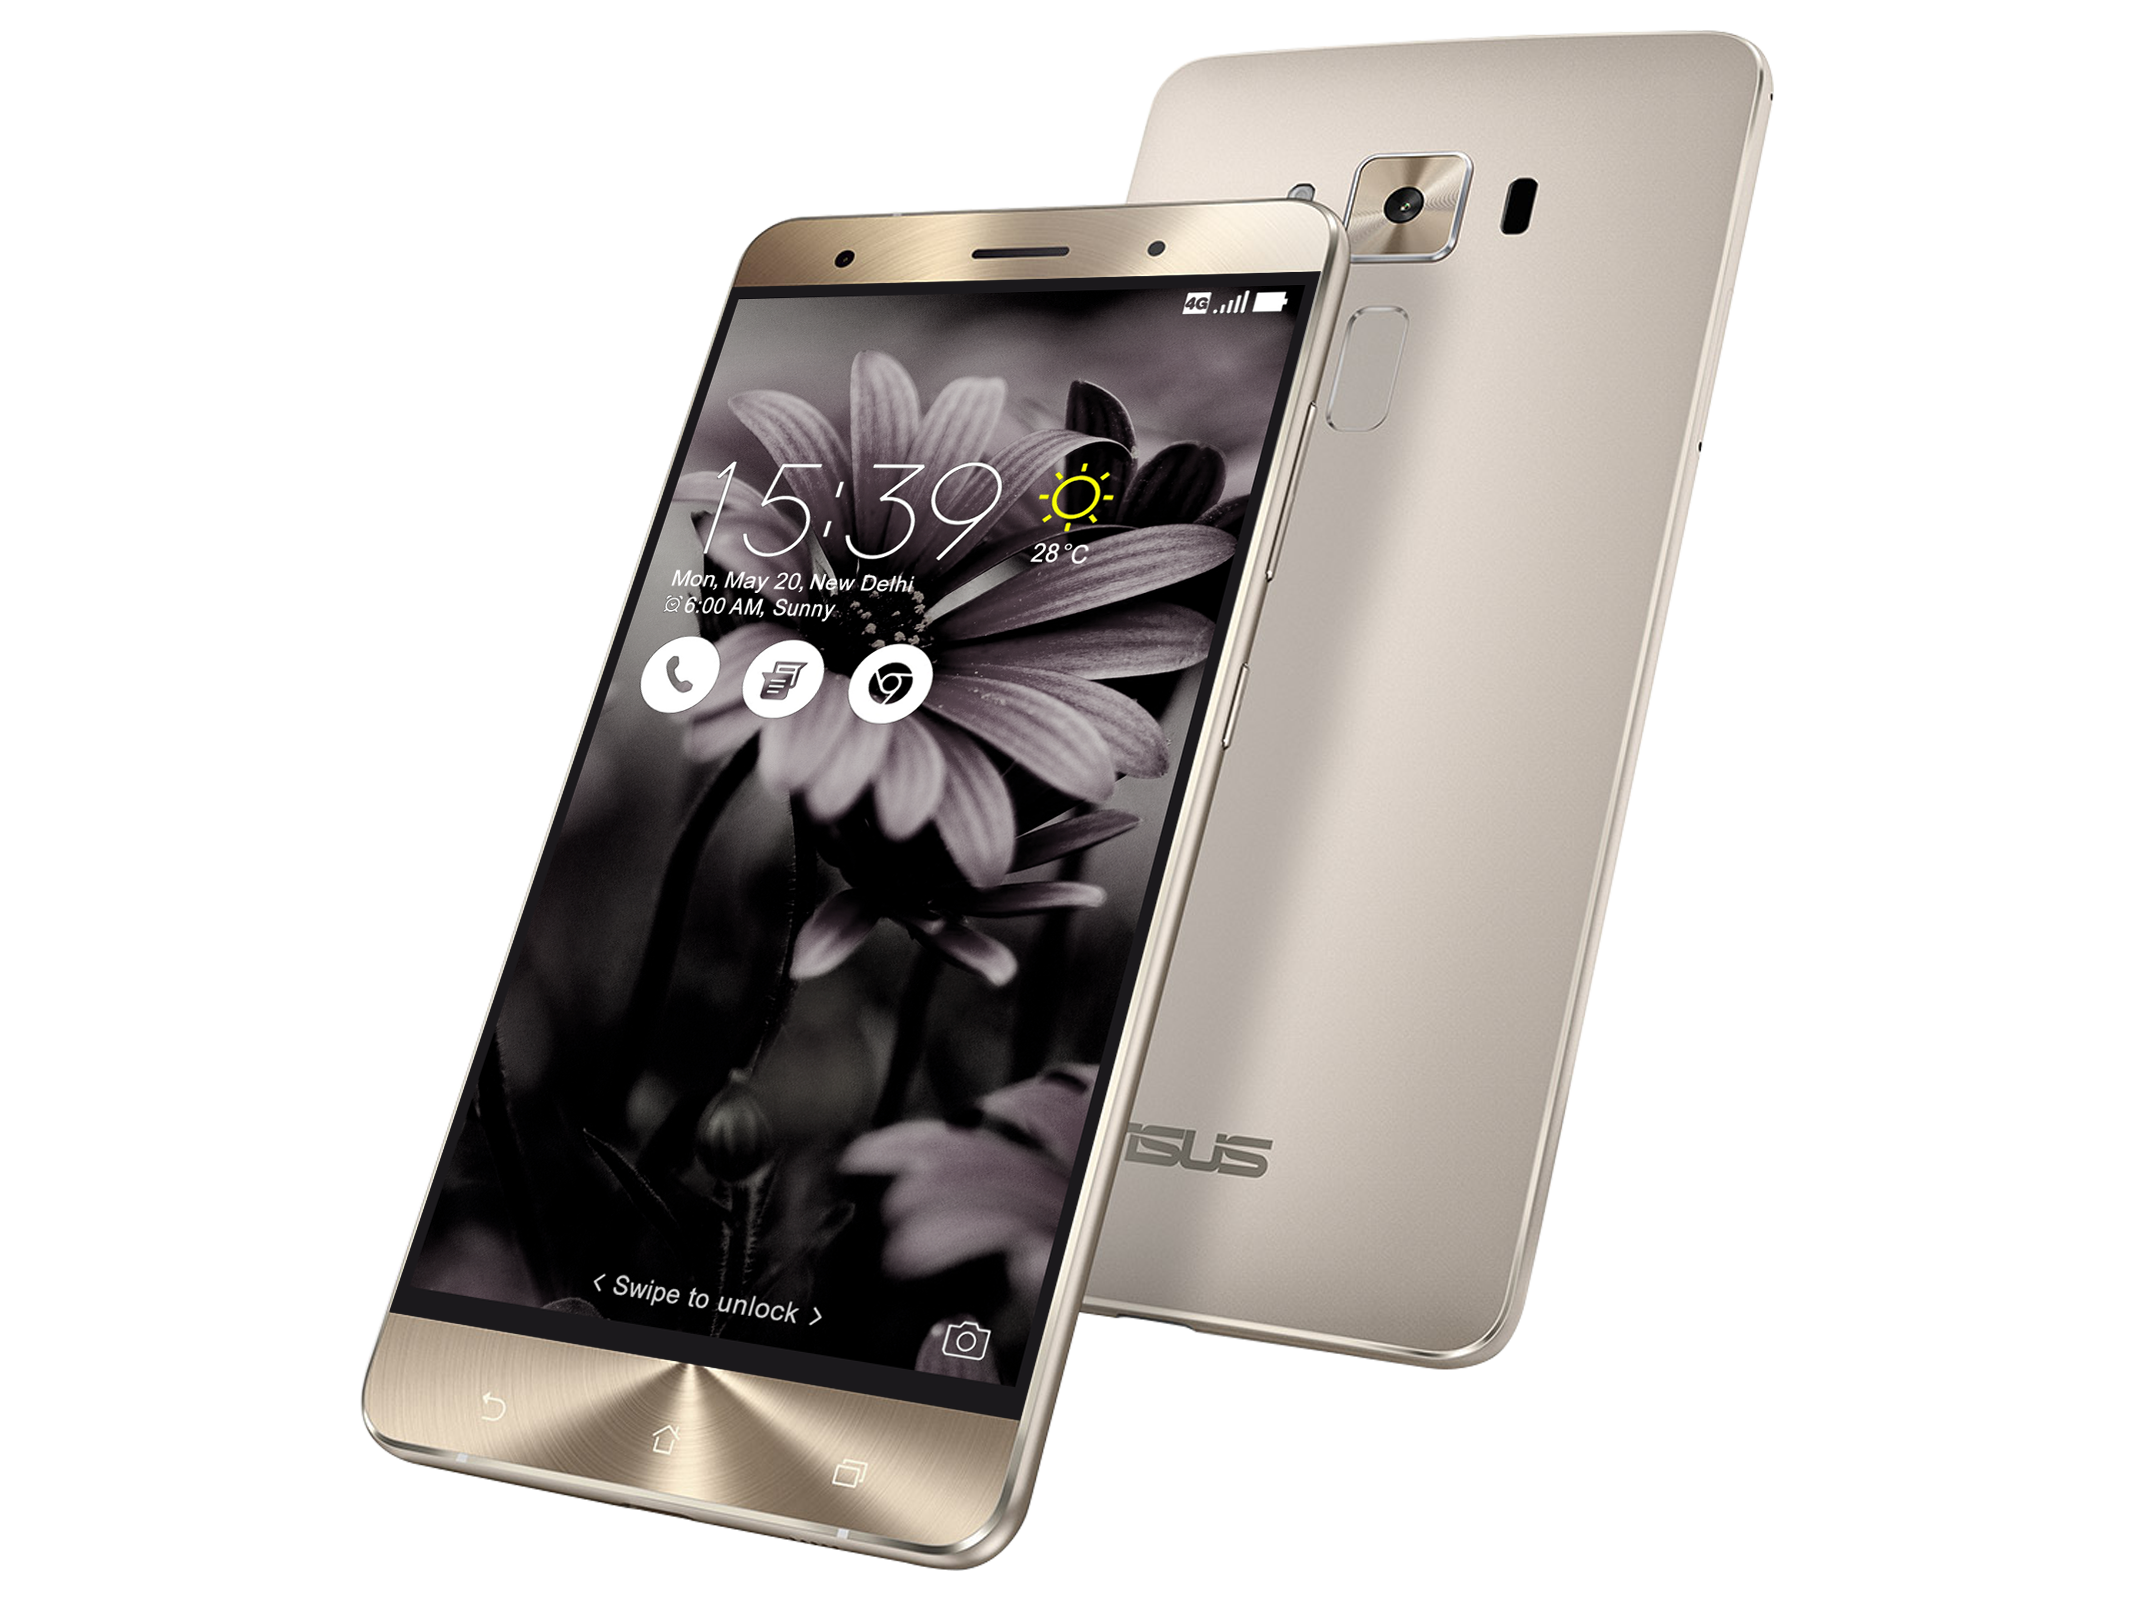 Asus Zenfone 3 Deluxe Zs570kl This Seems Like Asus Reinvented By D Wise One Chip Monks Medium